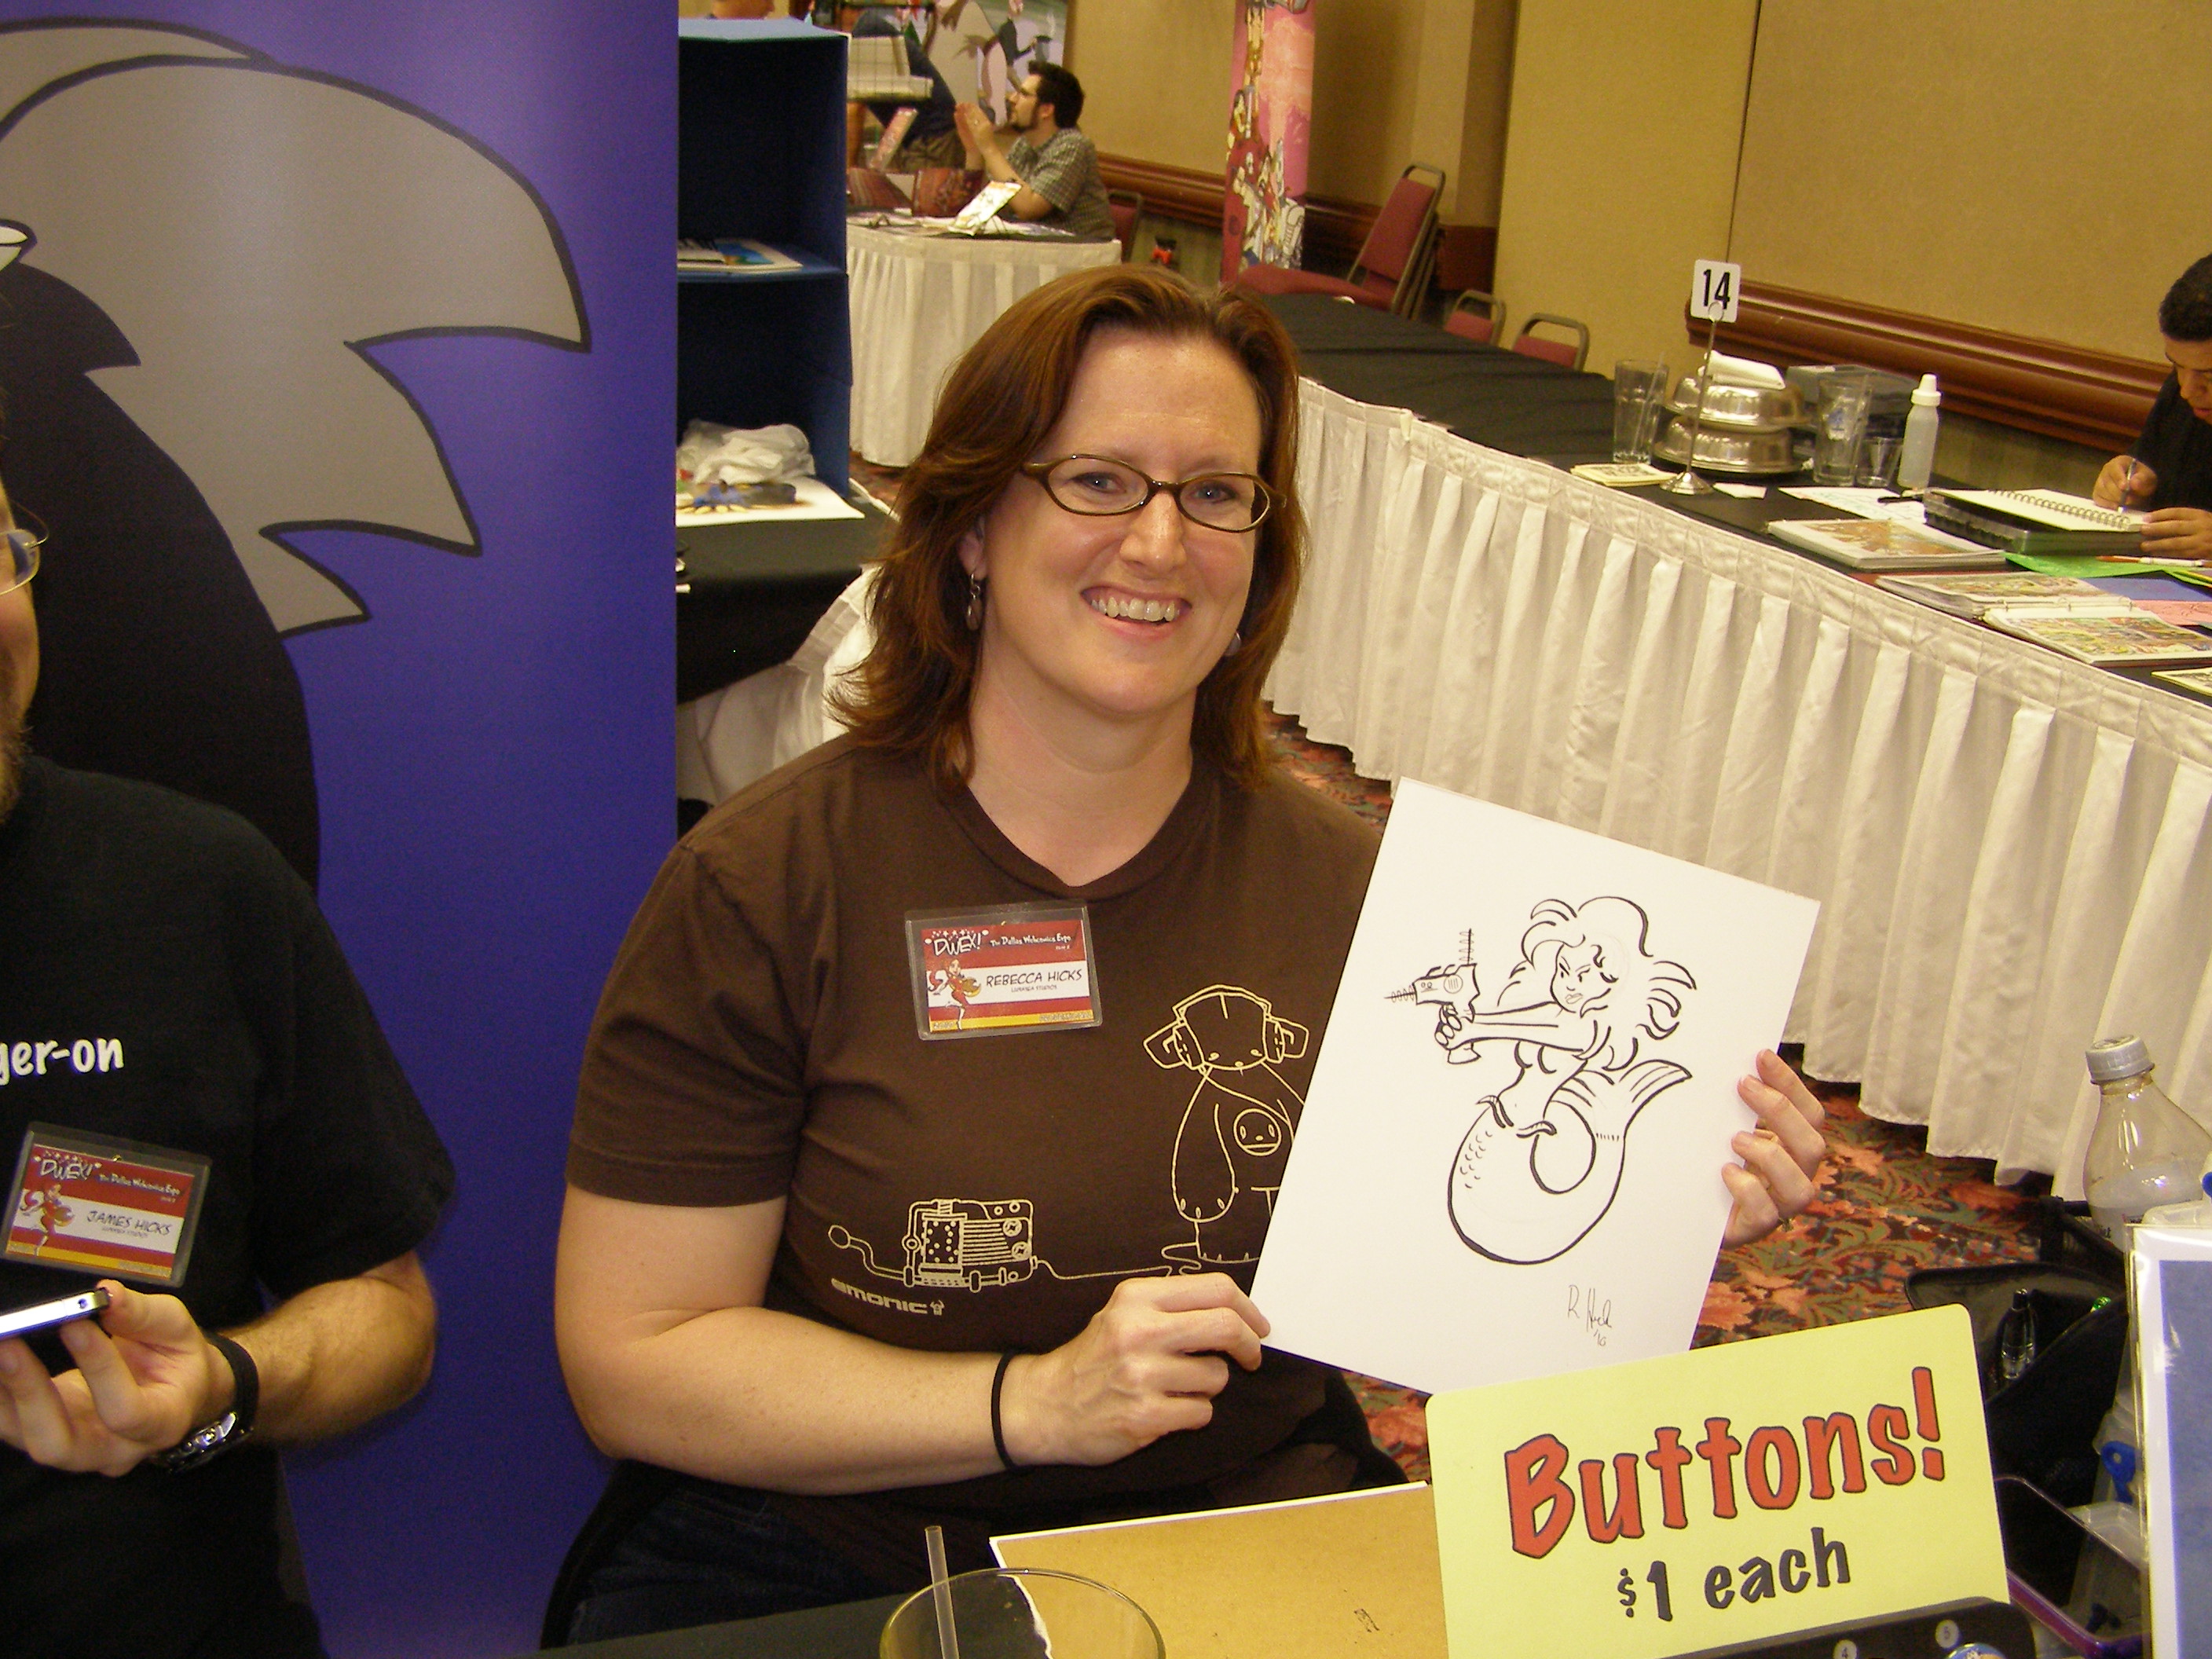 Rebeca Hicks holding a sketch of a mermaid holding a ray gun